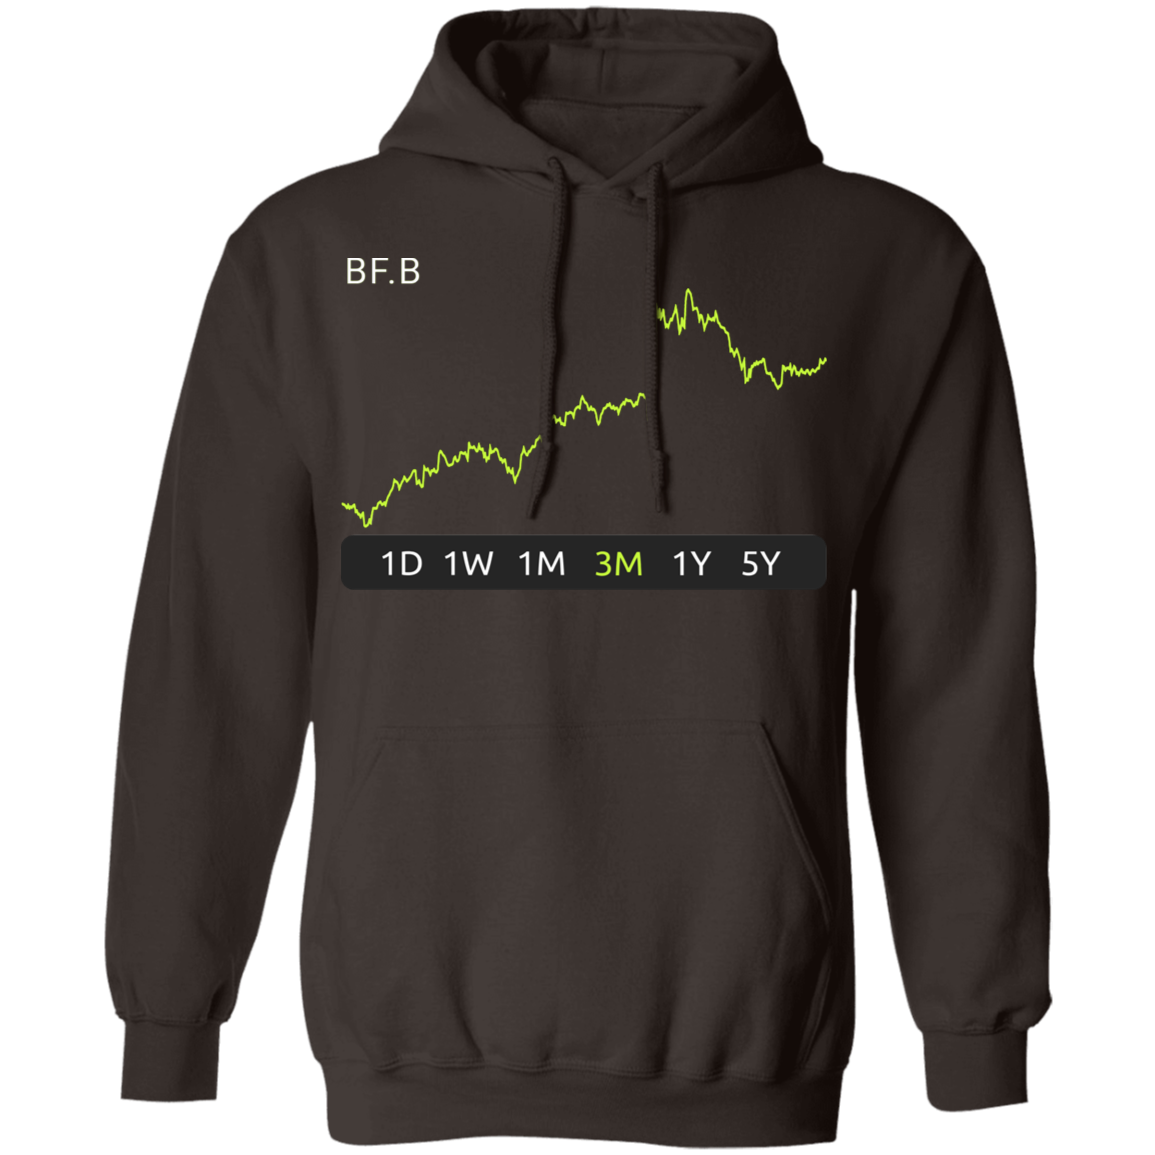 BF.B Stock 3m Pullover Hoodie